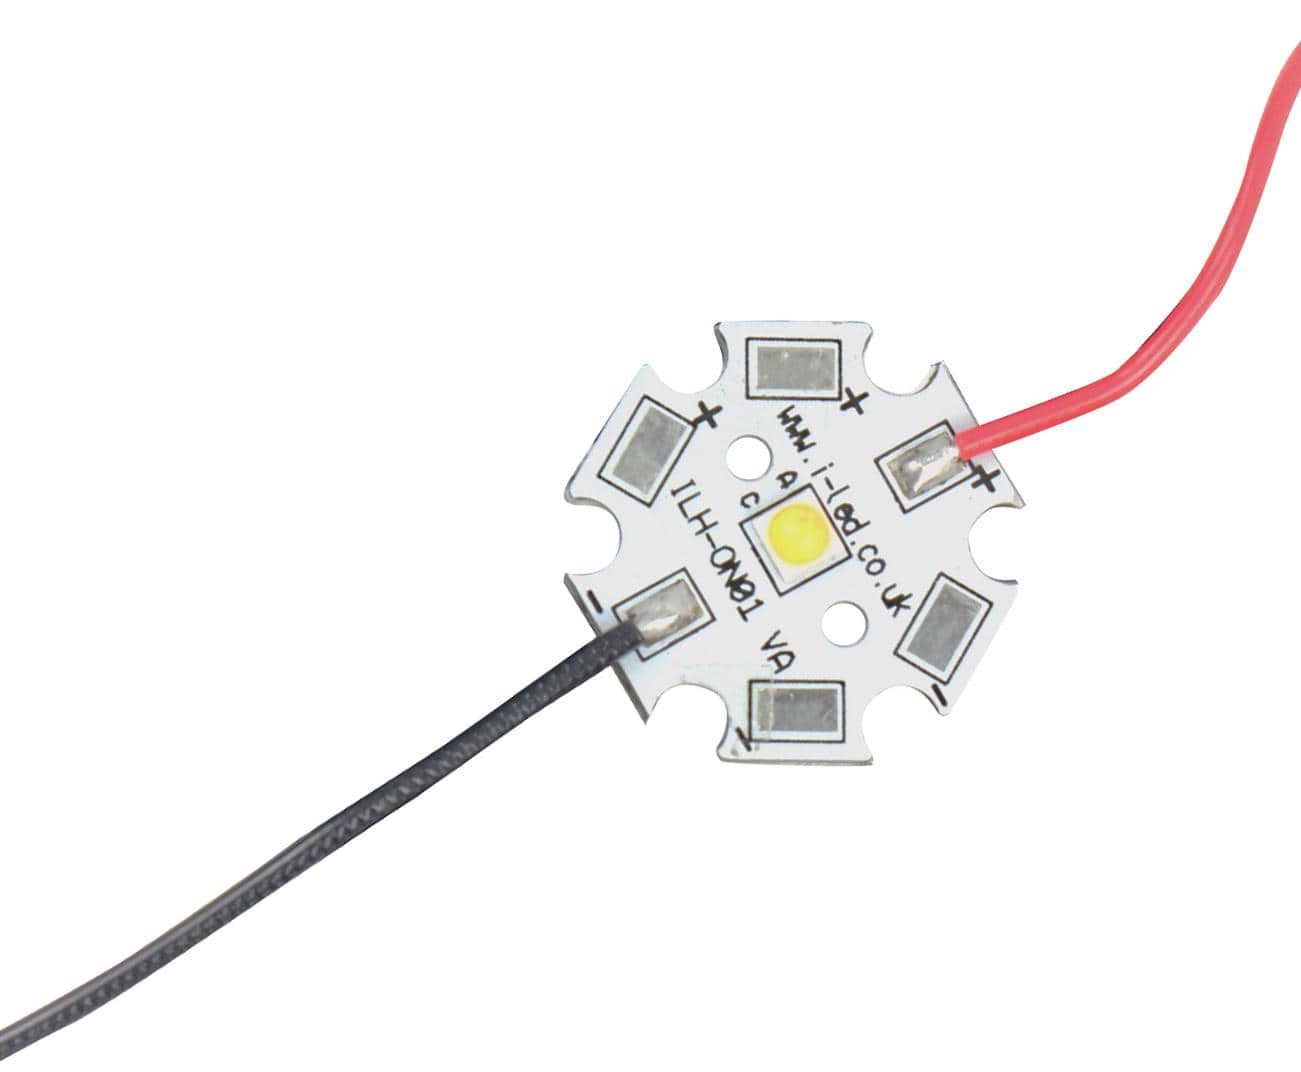 INTELLIGENT LED SOLUTIONS LED Modules, Single Colour ILH-PO01-RDOR-SC221-WIR200. LED MOD, RED ORG, 617NM, 89.2LM, 0.76W INTELLIGENT LED SOLUTIONS 3583124 ILH-PO01-RDOR-SC221-WIR200.